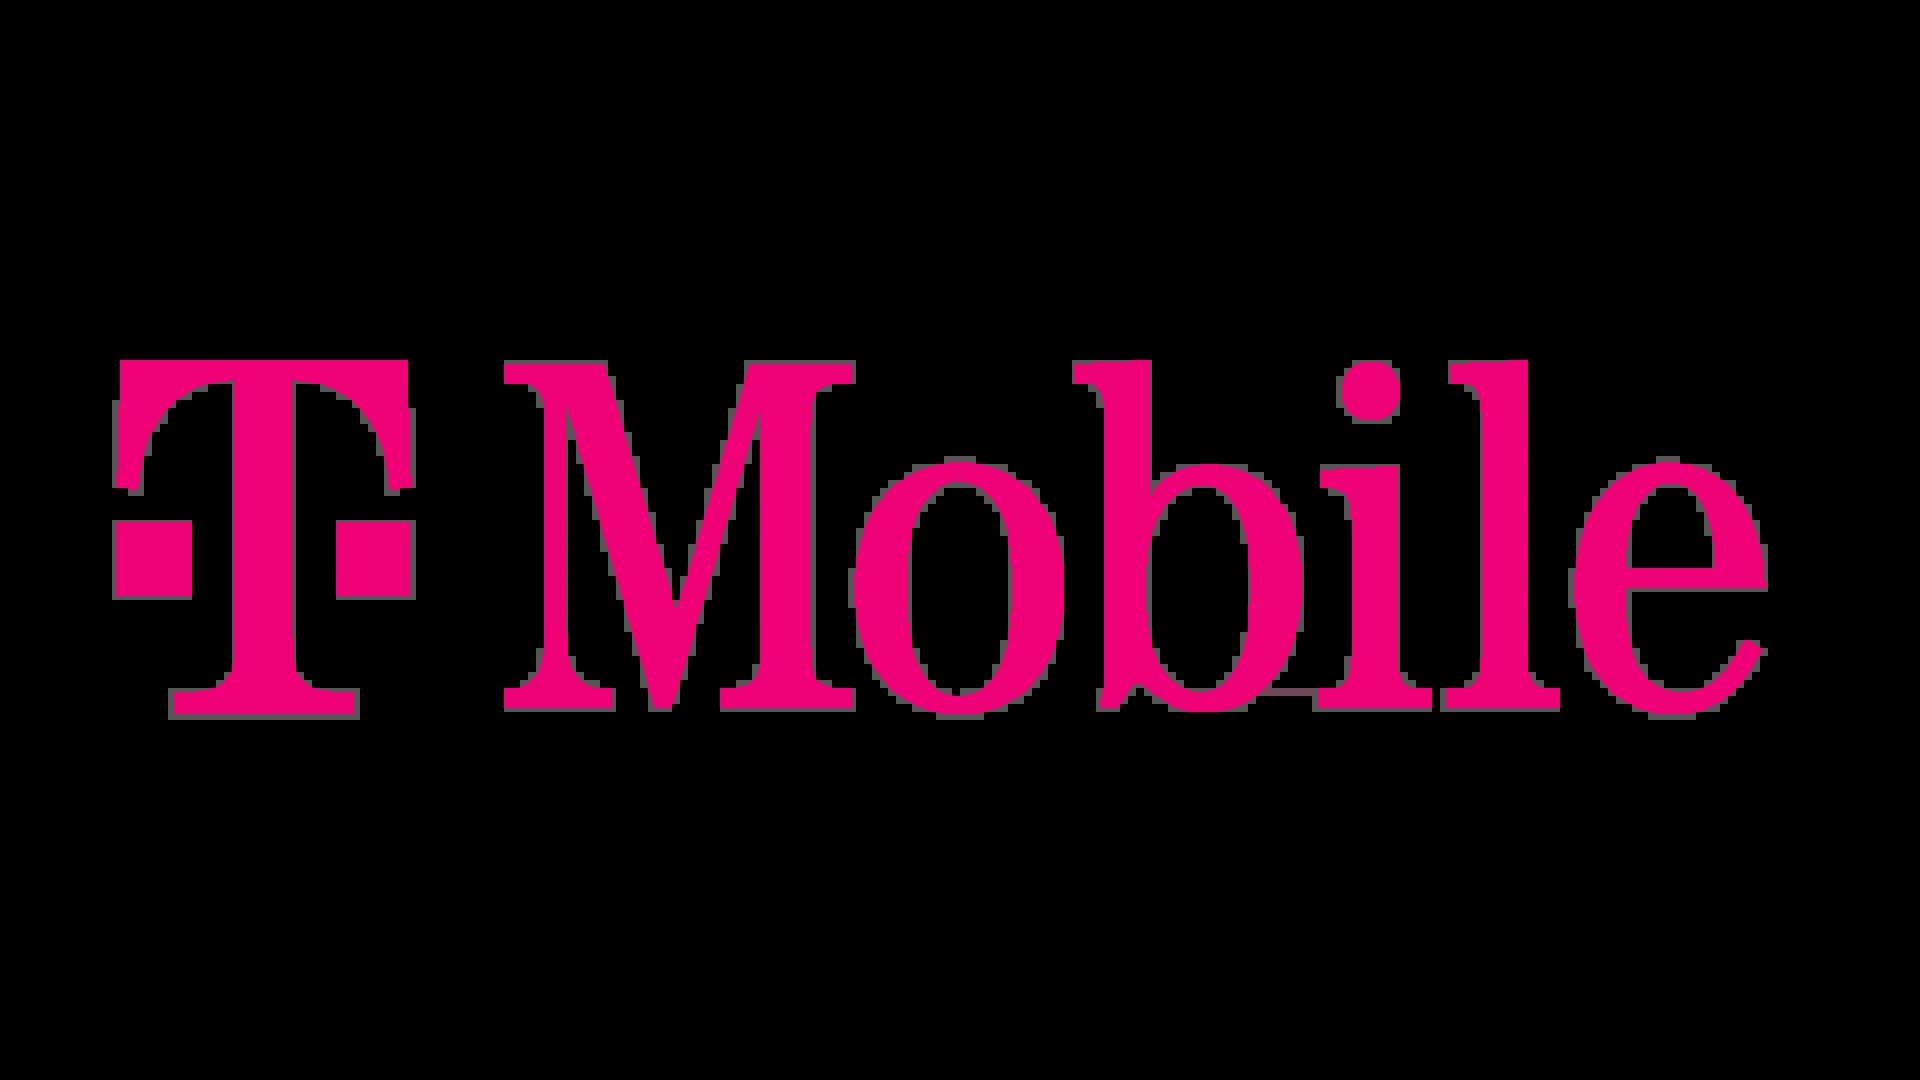 T-Mobile says it's working to fix widespread network issues